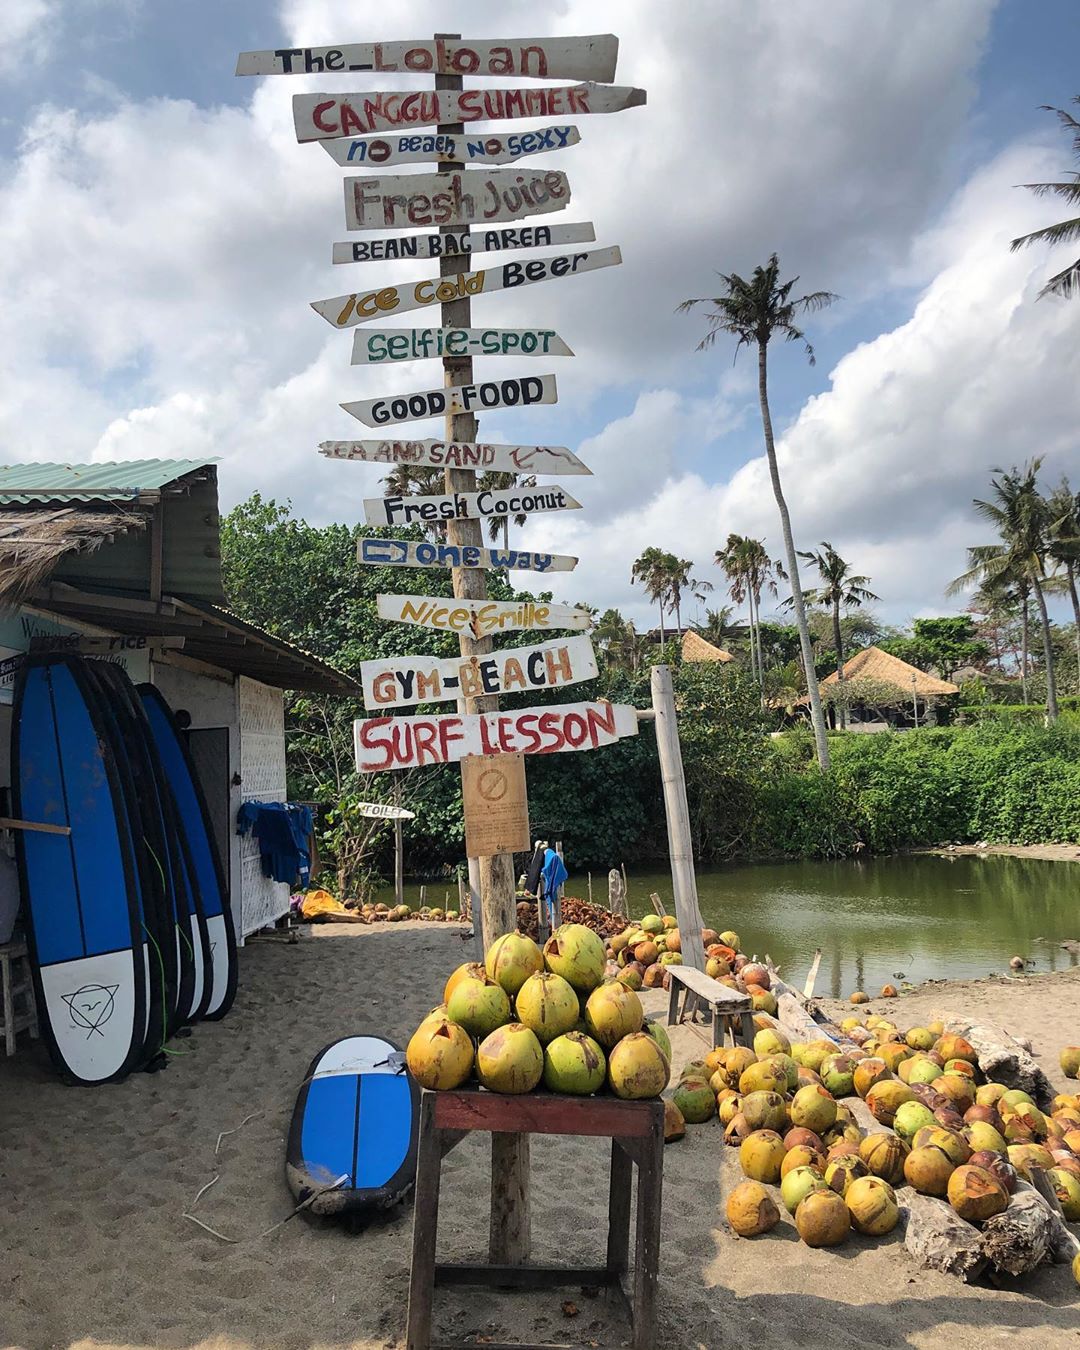 Daily decisions in Bali ↘️↗️ ↖️↘️
Thank you @comoumacanggu for making such special memories and @tropicsurf for teaching us to surf 
</p>
				</div>
			</div>
		</div>
				
				
		<div class=